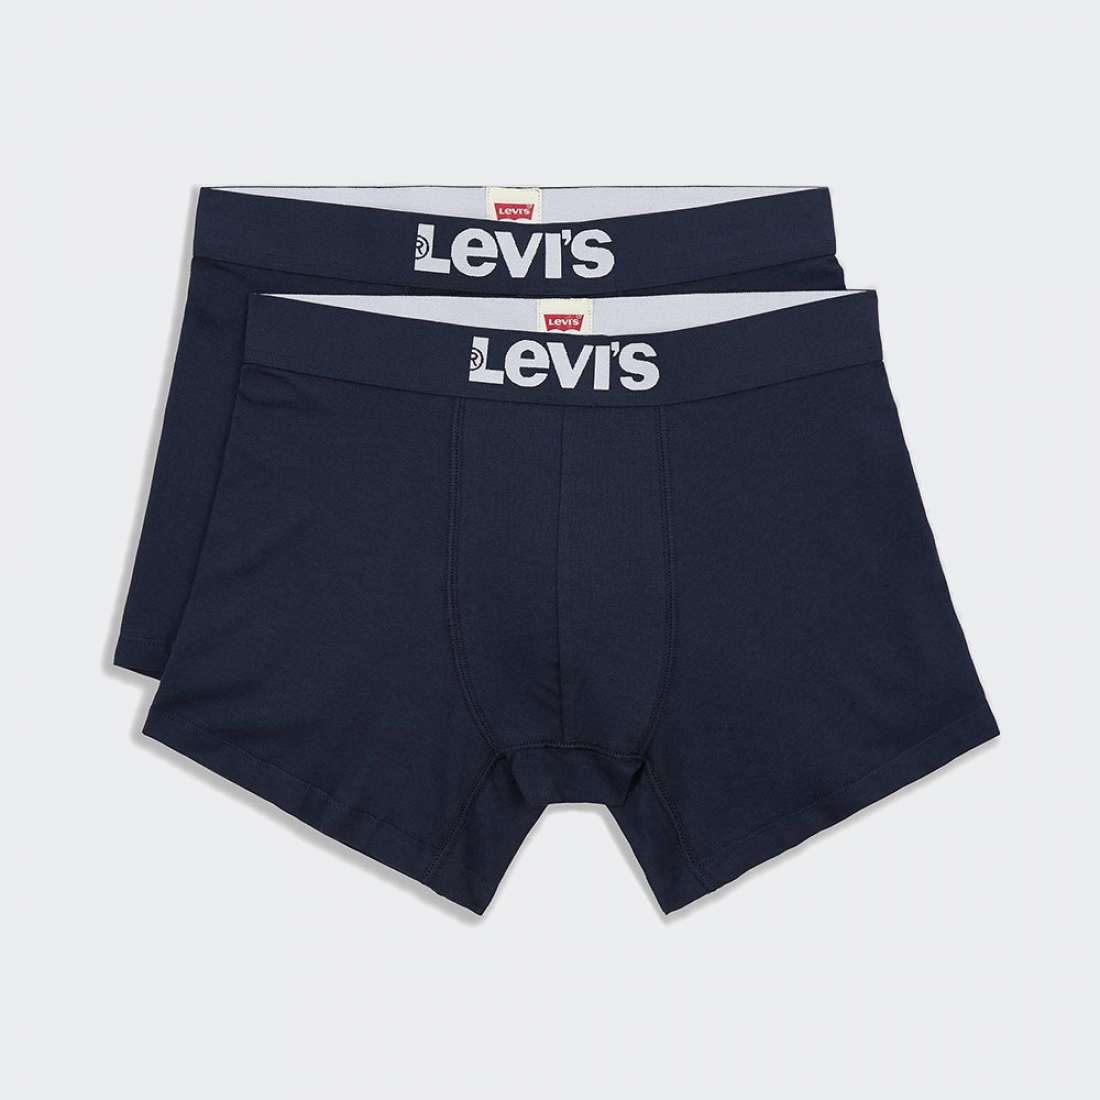 PACK 2 BOXERS LEVIS SOLID BASIC NAVY